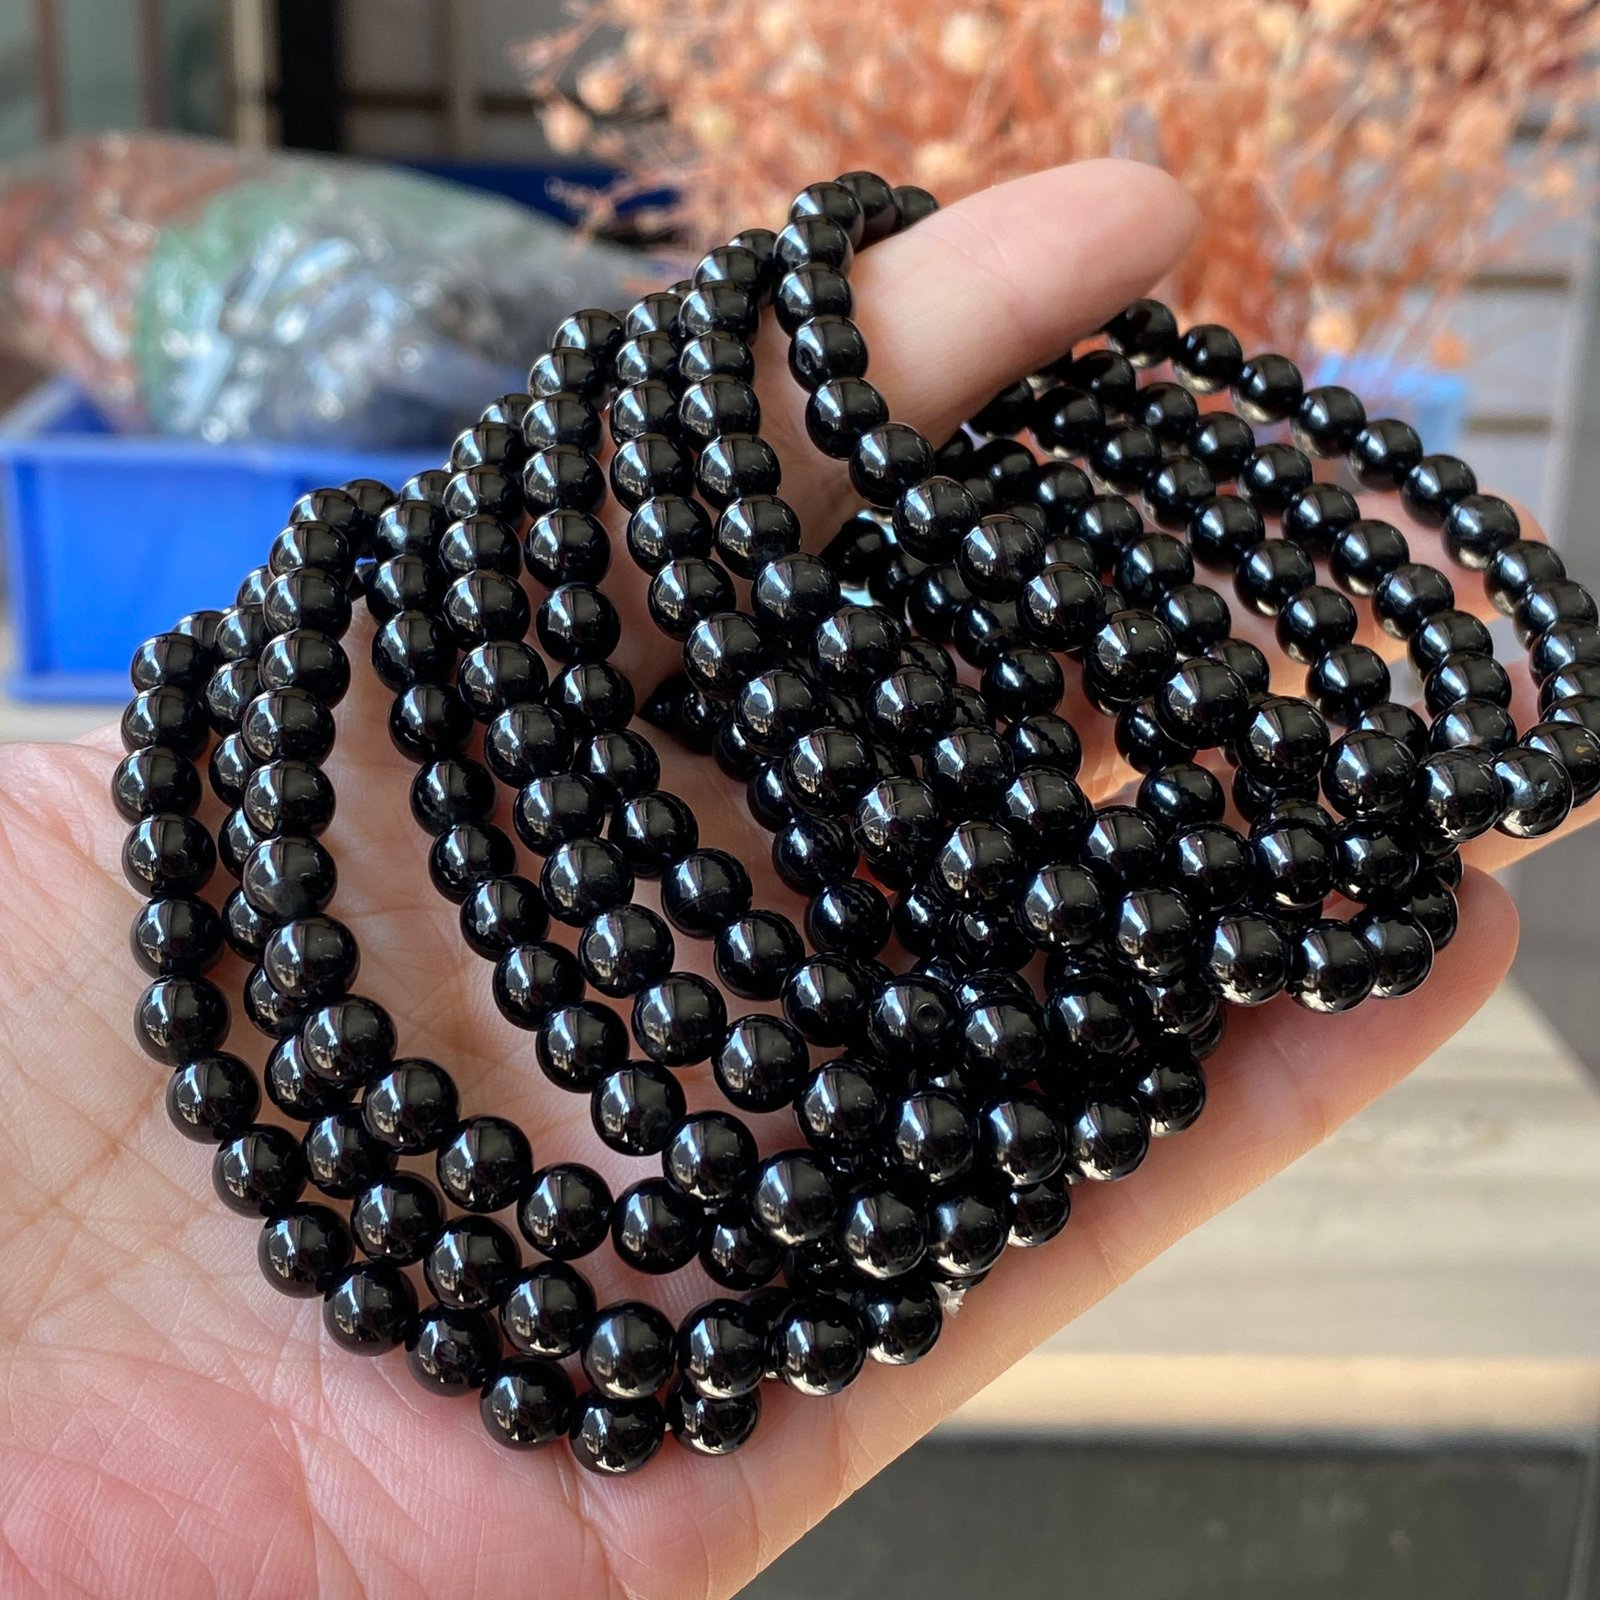 Black Tourmaline Bracelet Natural Crystal Bracelet 8MM Beads Size AAA  Quality 24 Beads at Rs 250/piece | Anand | ID: 27101385830